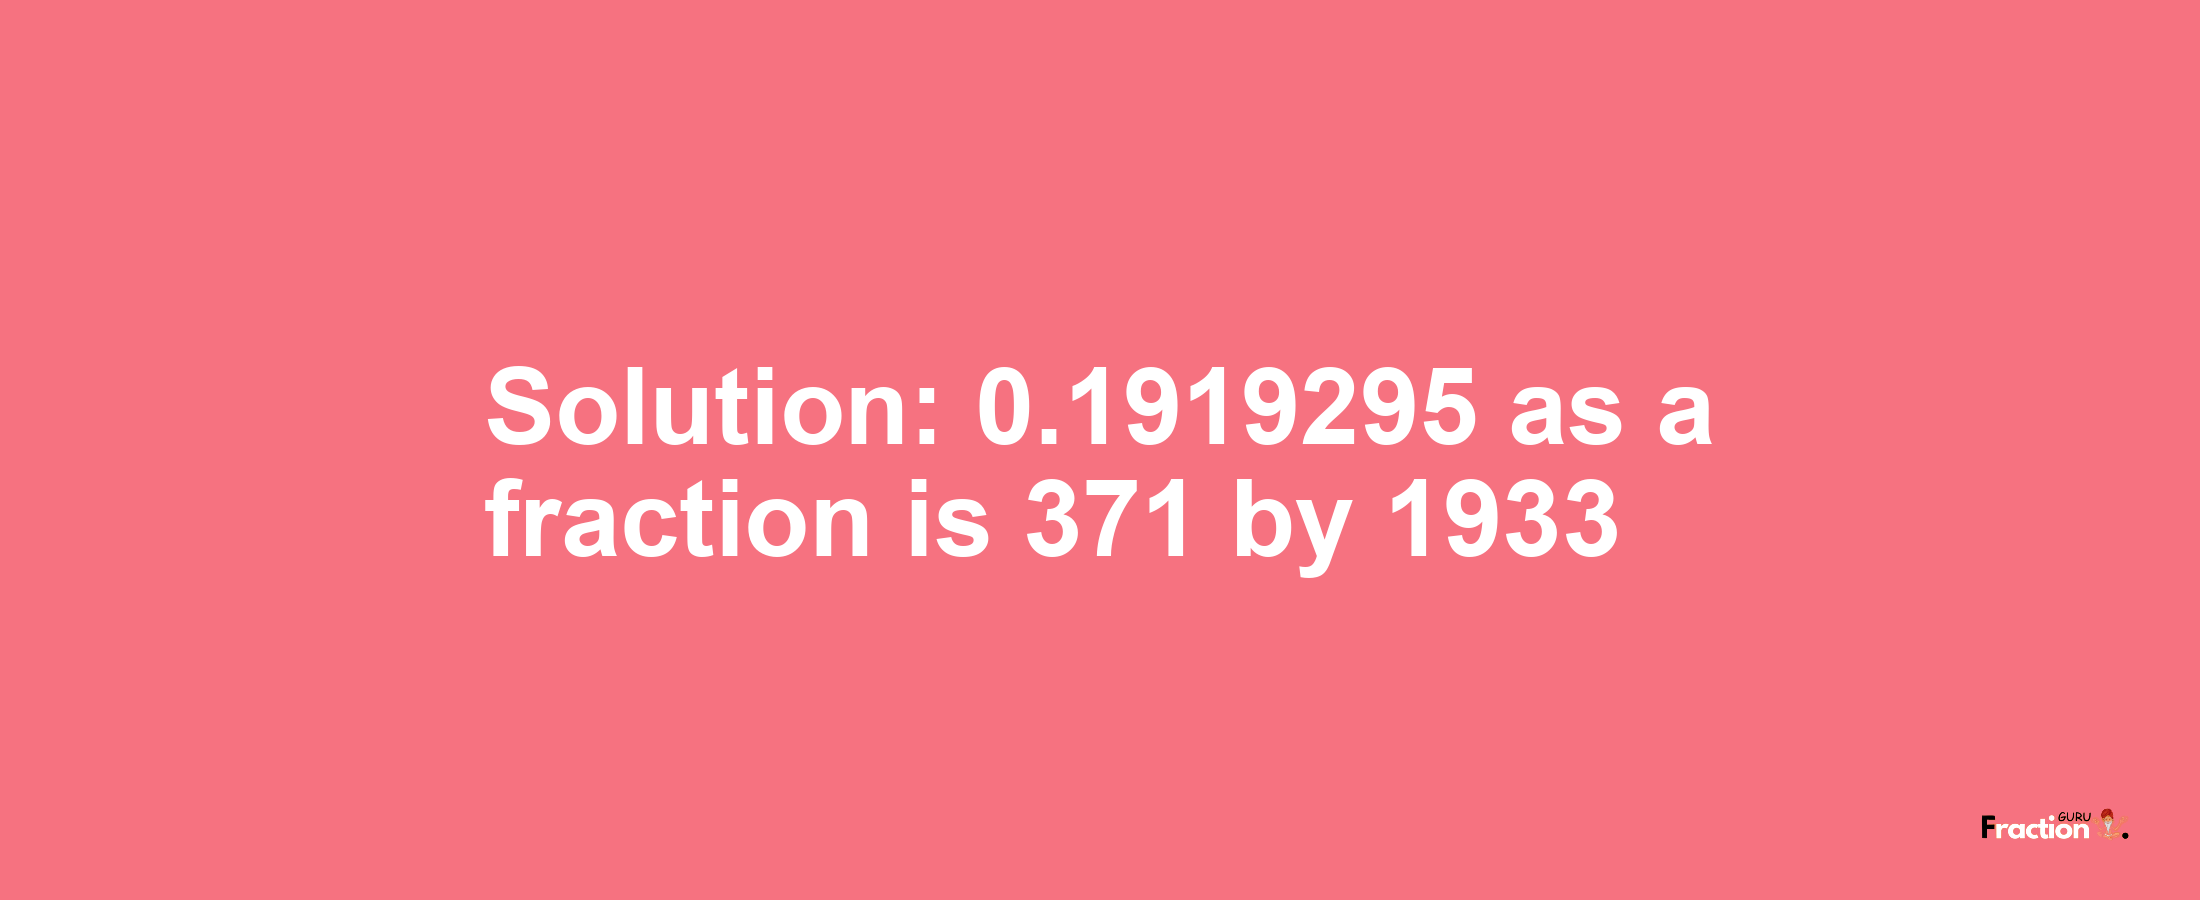 Solution:0.1919295 as a fraction is 371/1933